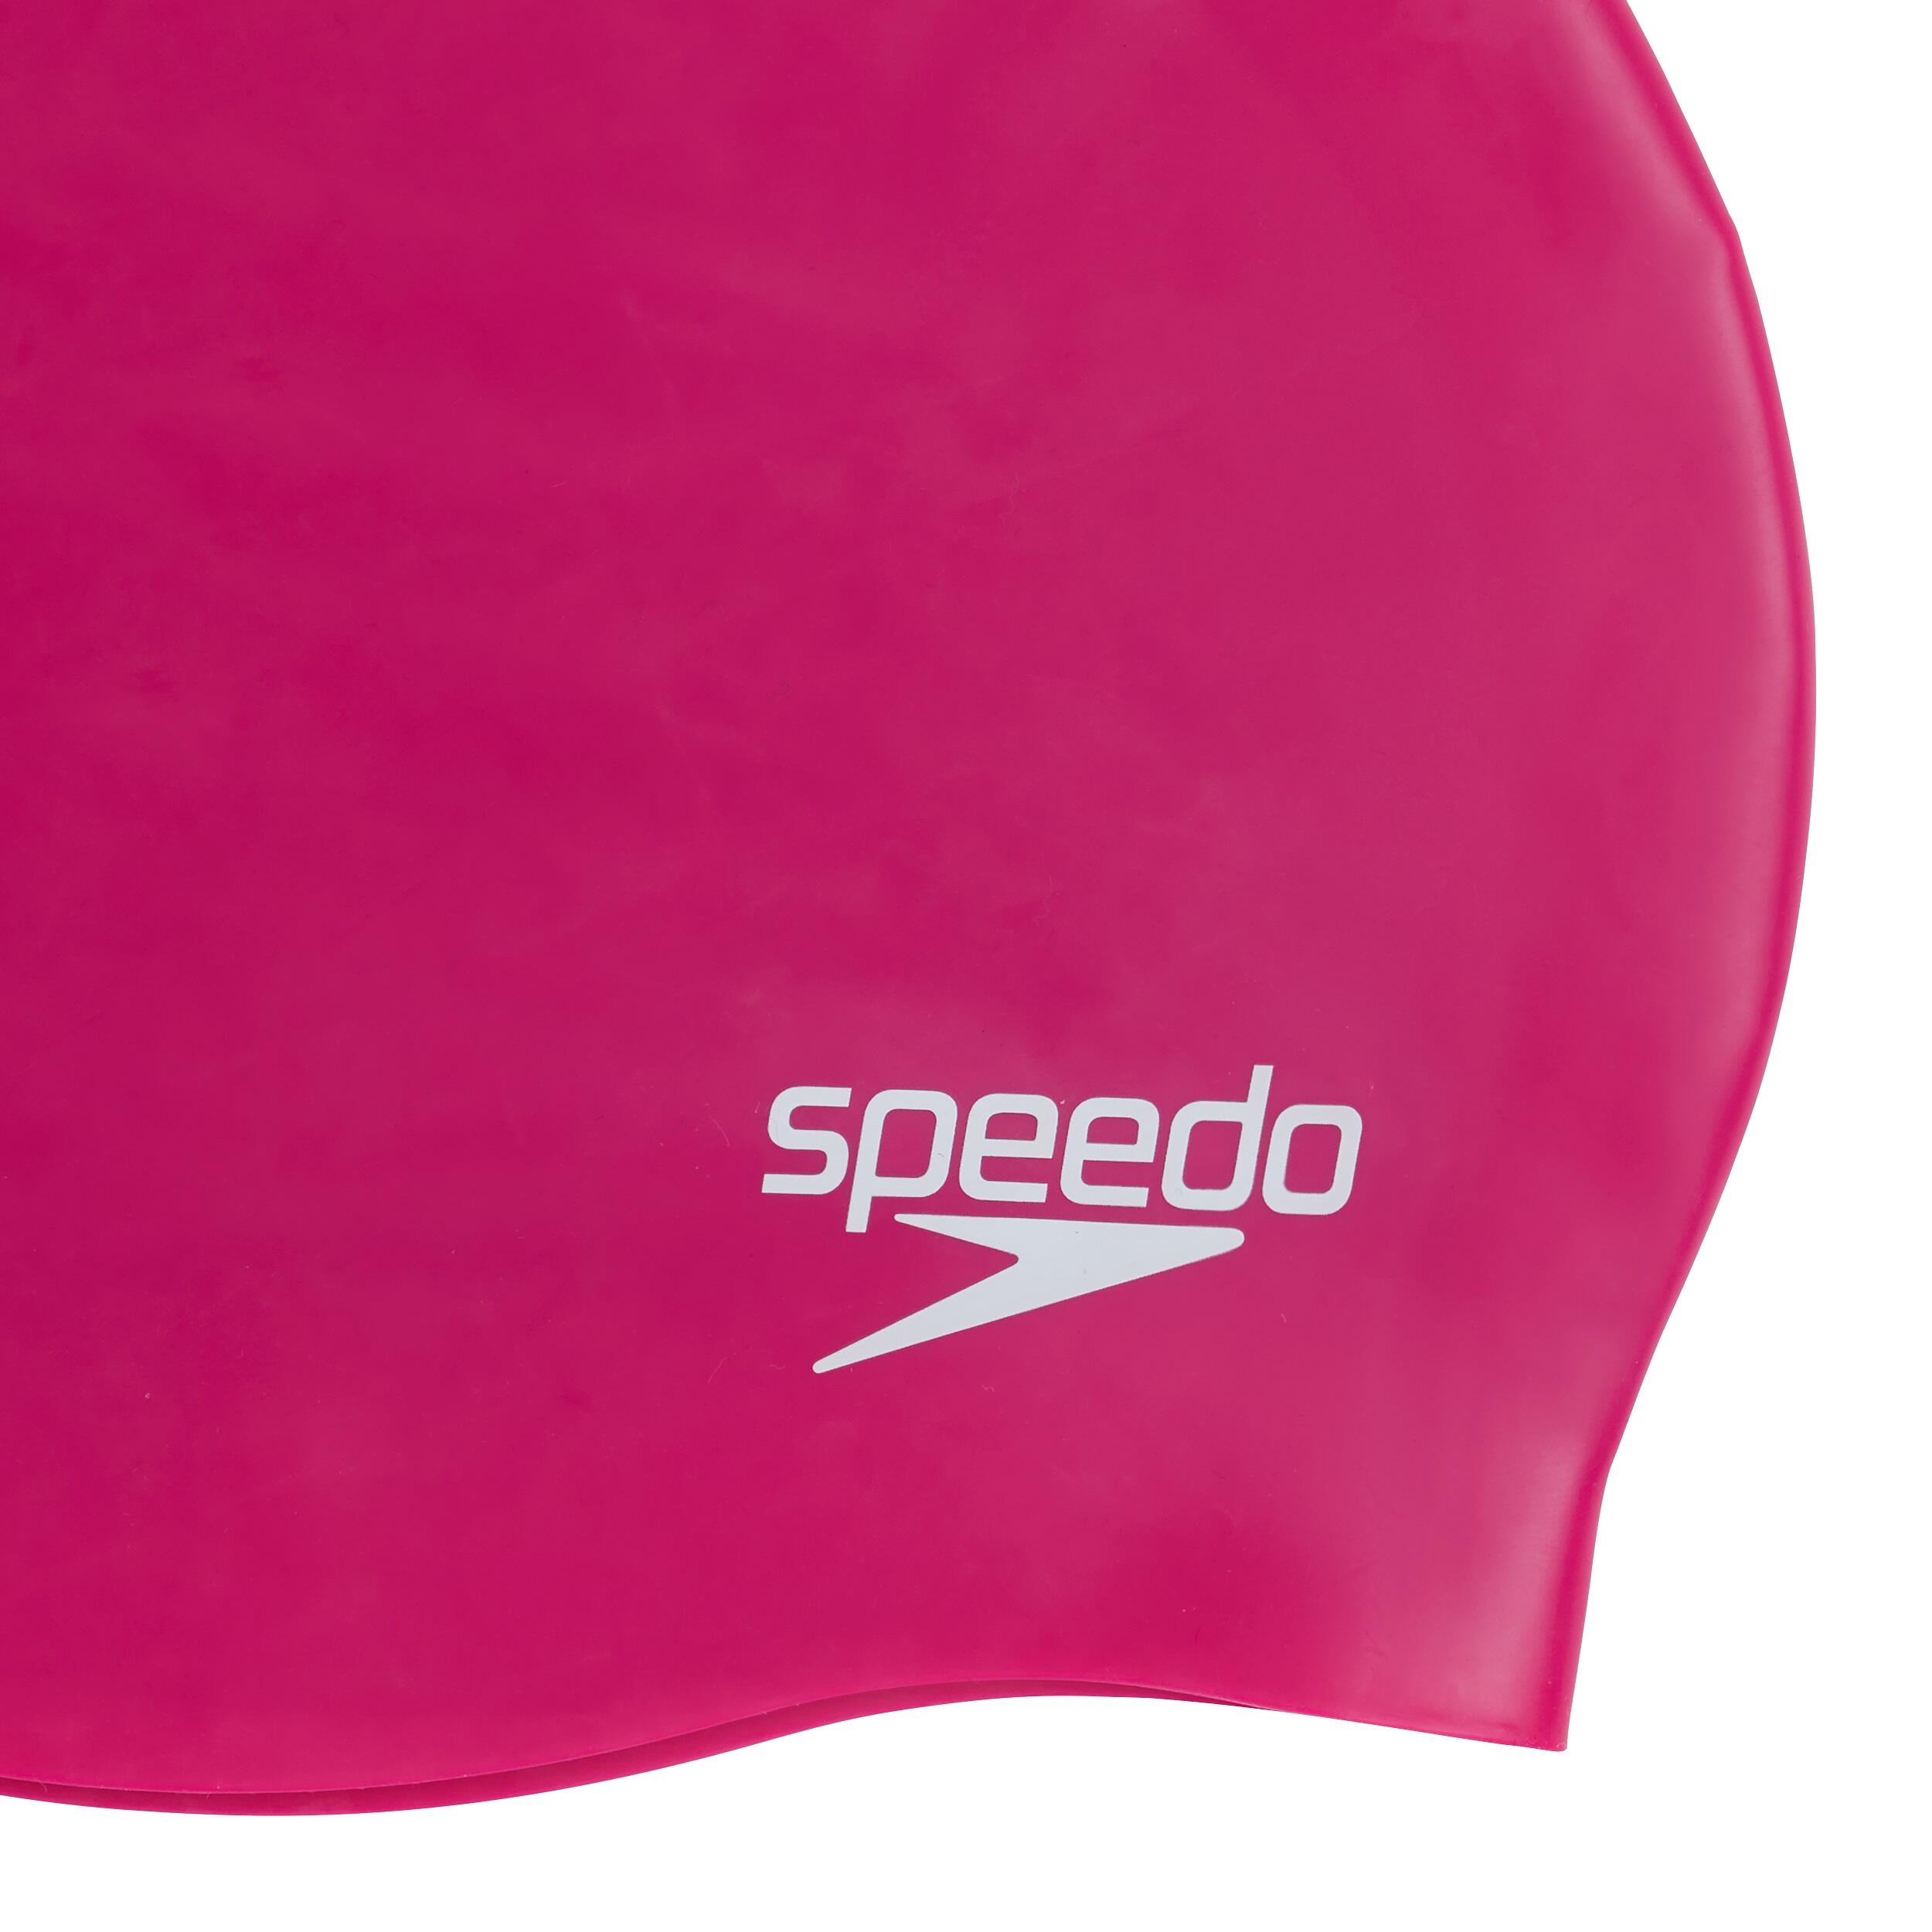 Speedo Plain Moulded Silicone Cap - Electric Pink 2/5